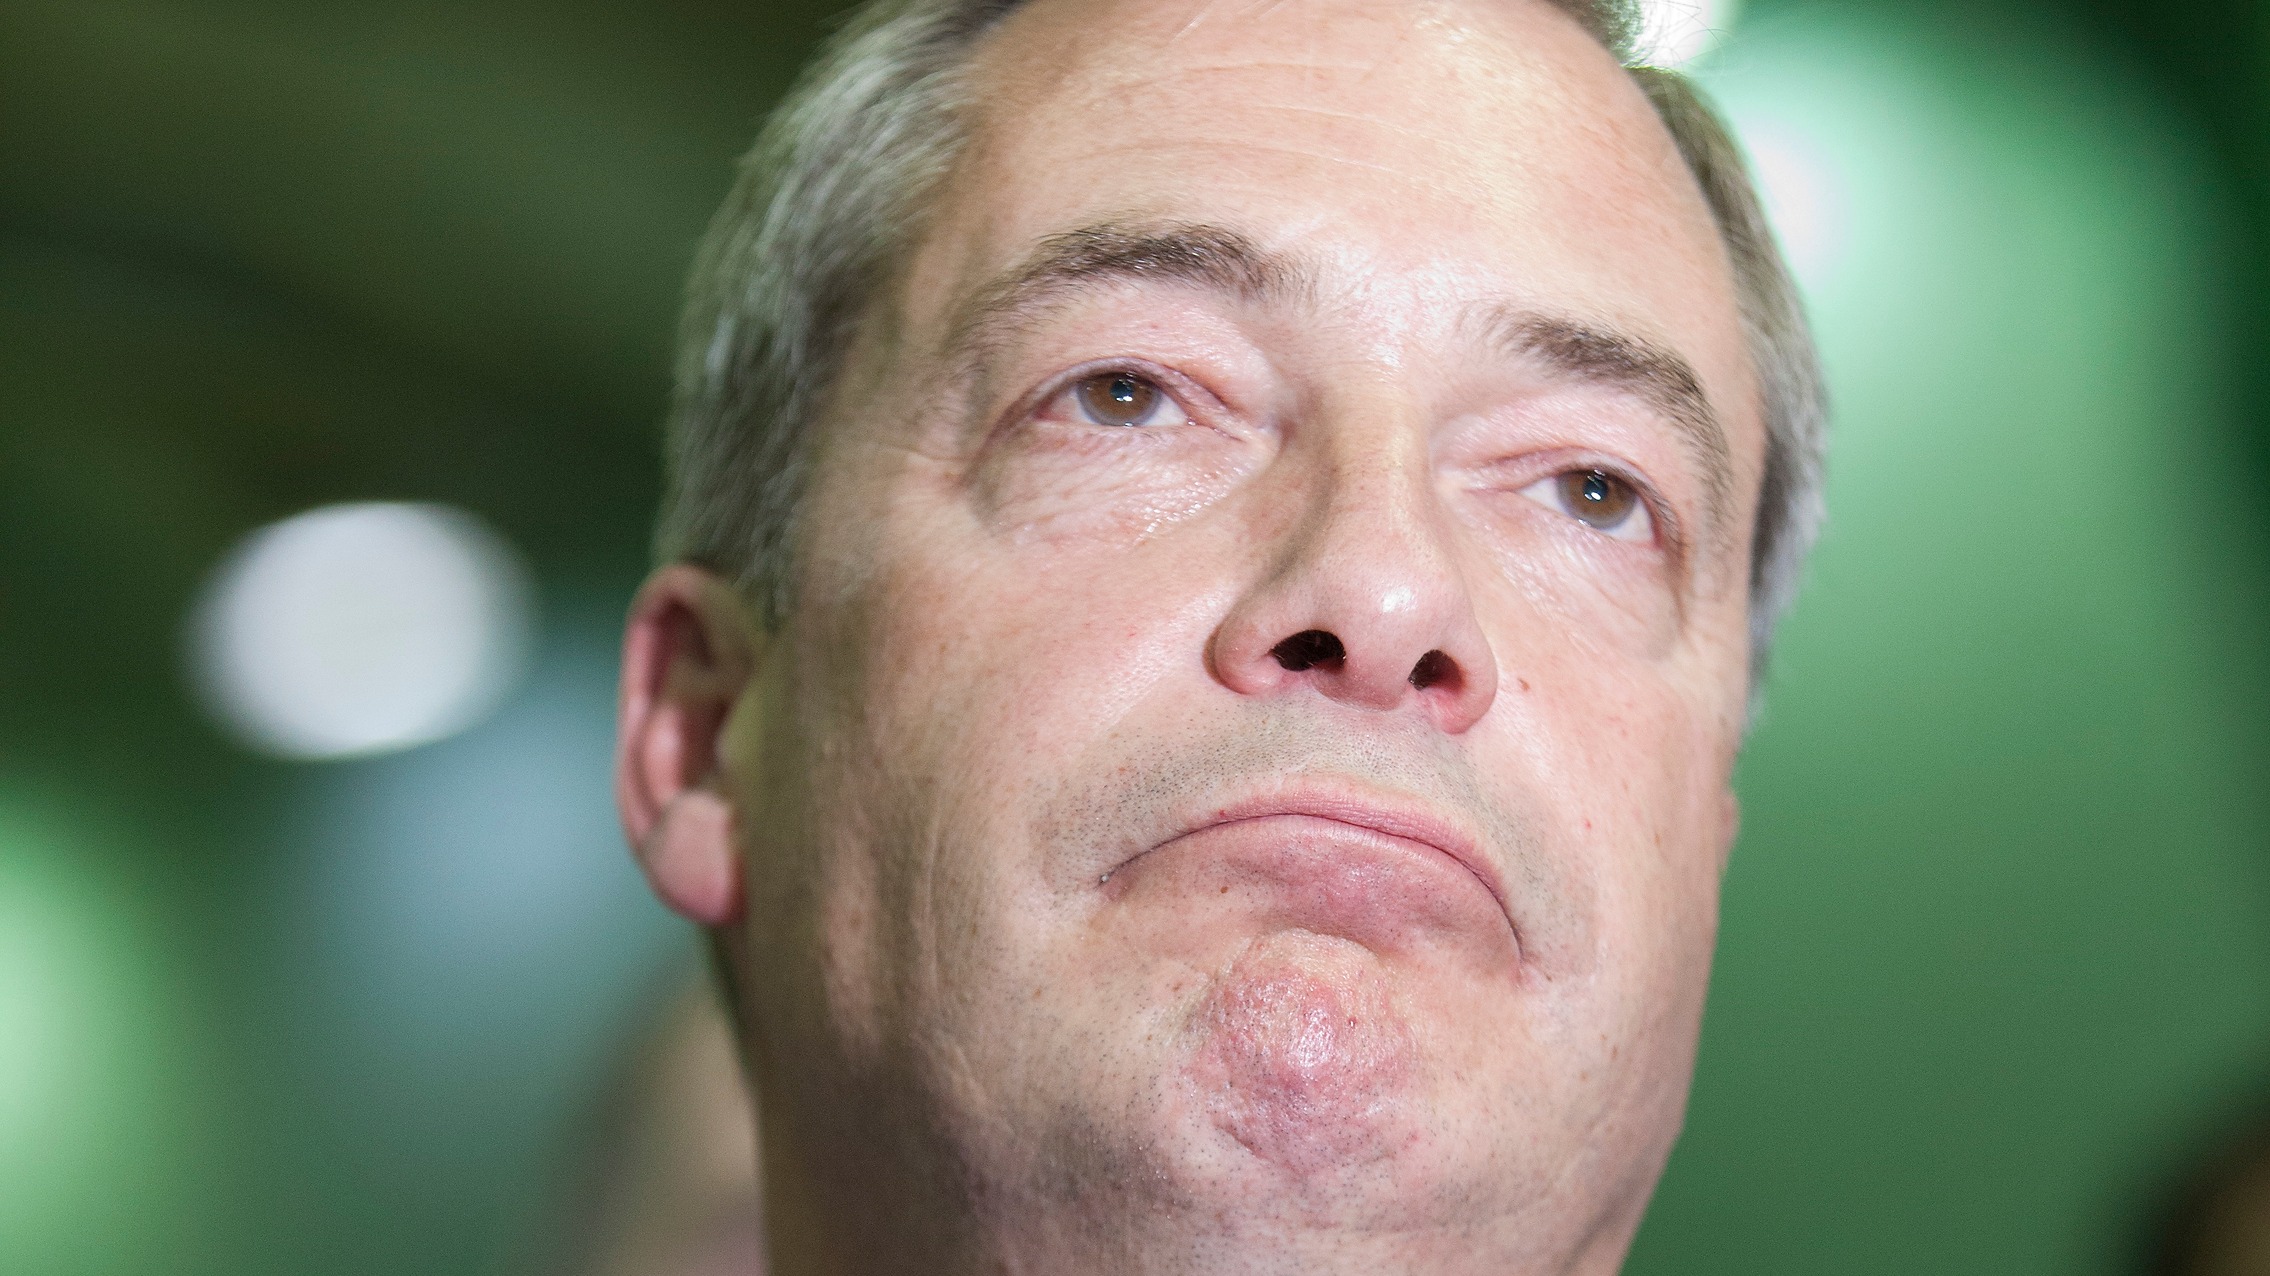 Ukip Nigel Farage Misspoke Over Disowning Party Policy Of Banning